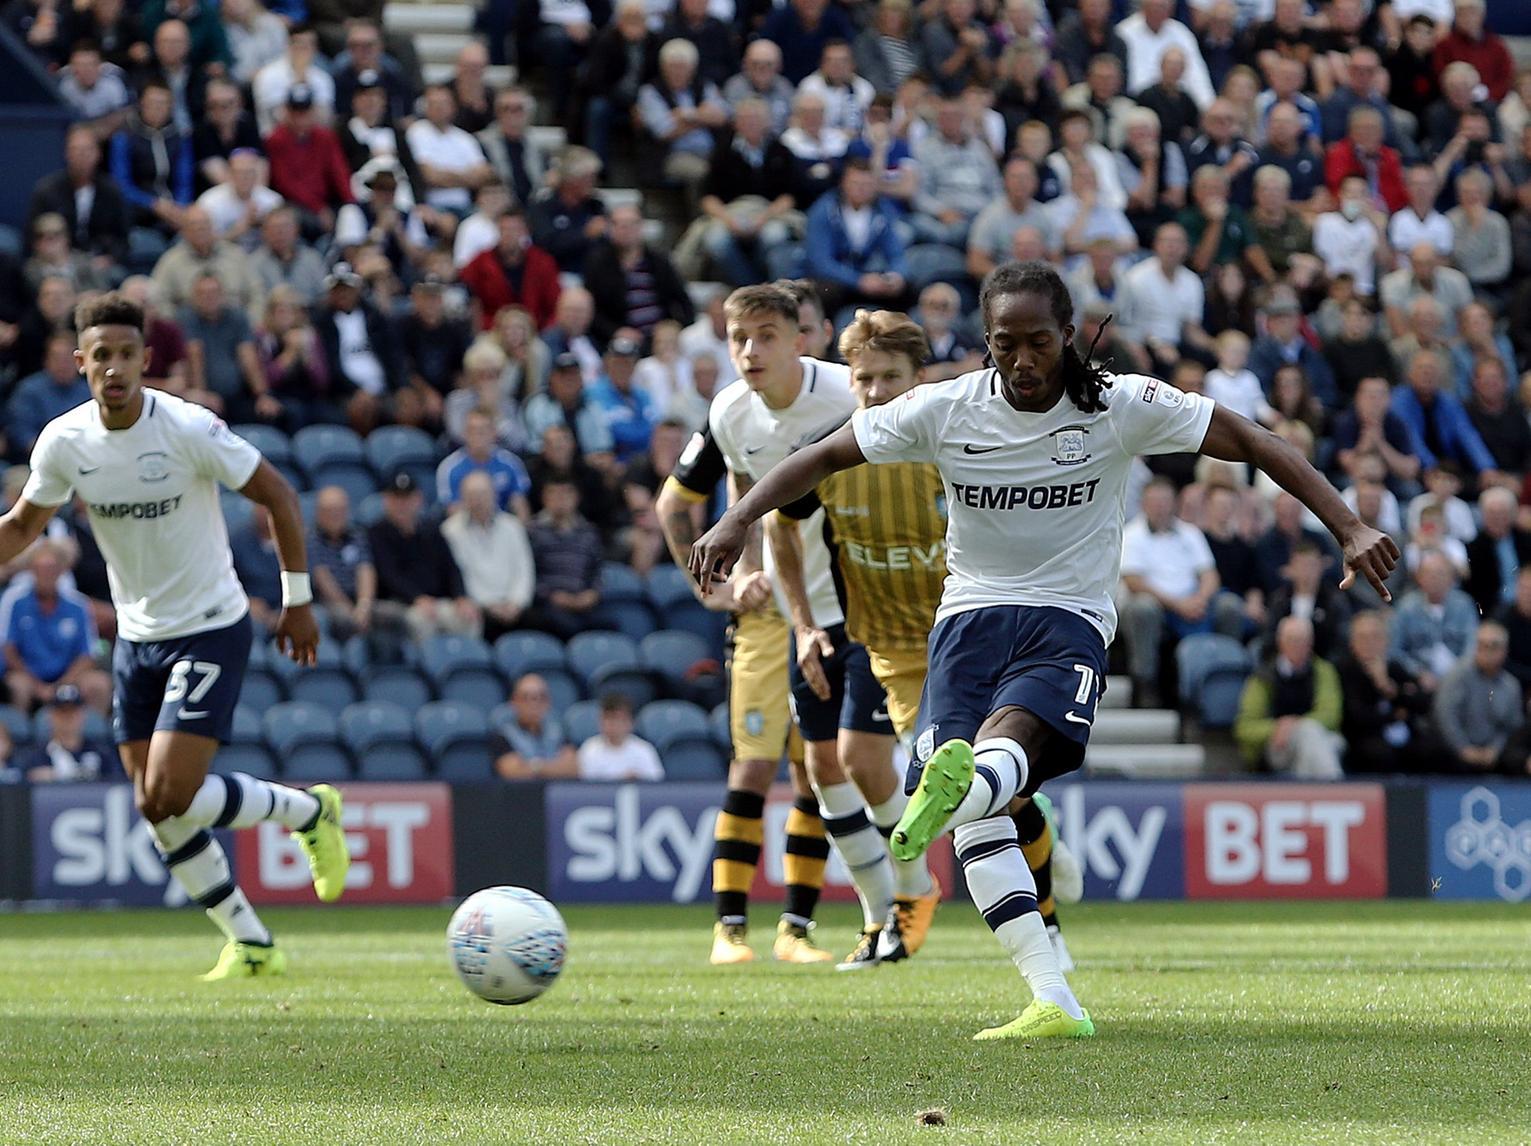 Daniel Johnson scores from the penalty spot against Sheffield Wednesday at Deepdale on the opening day of the 2017/18 season